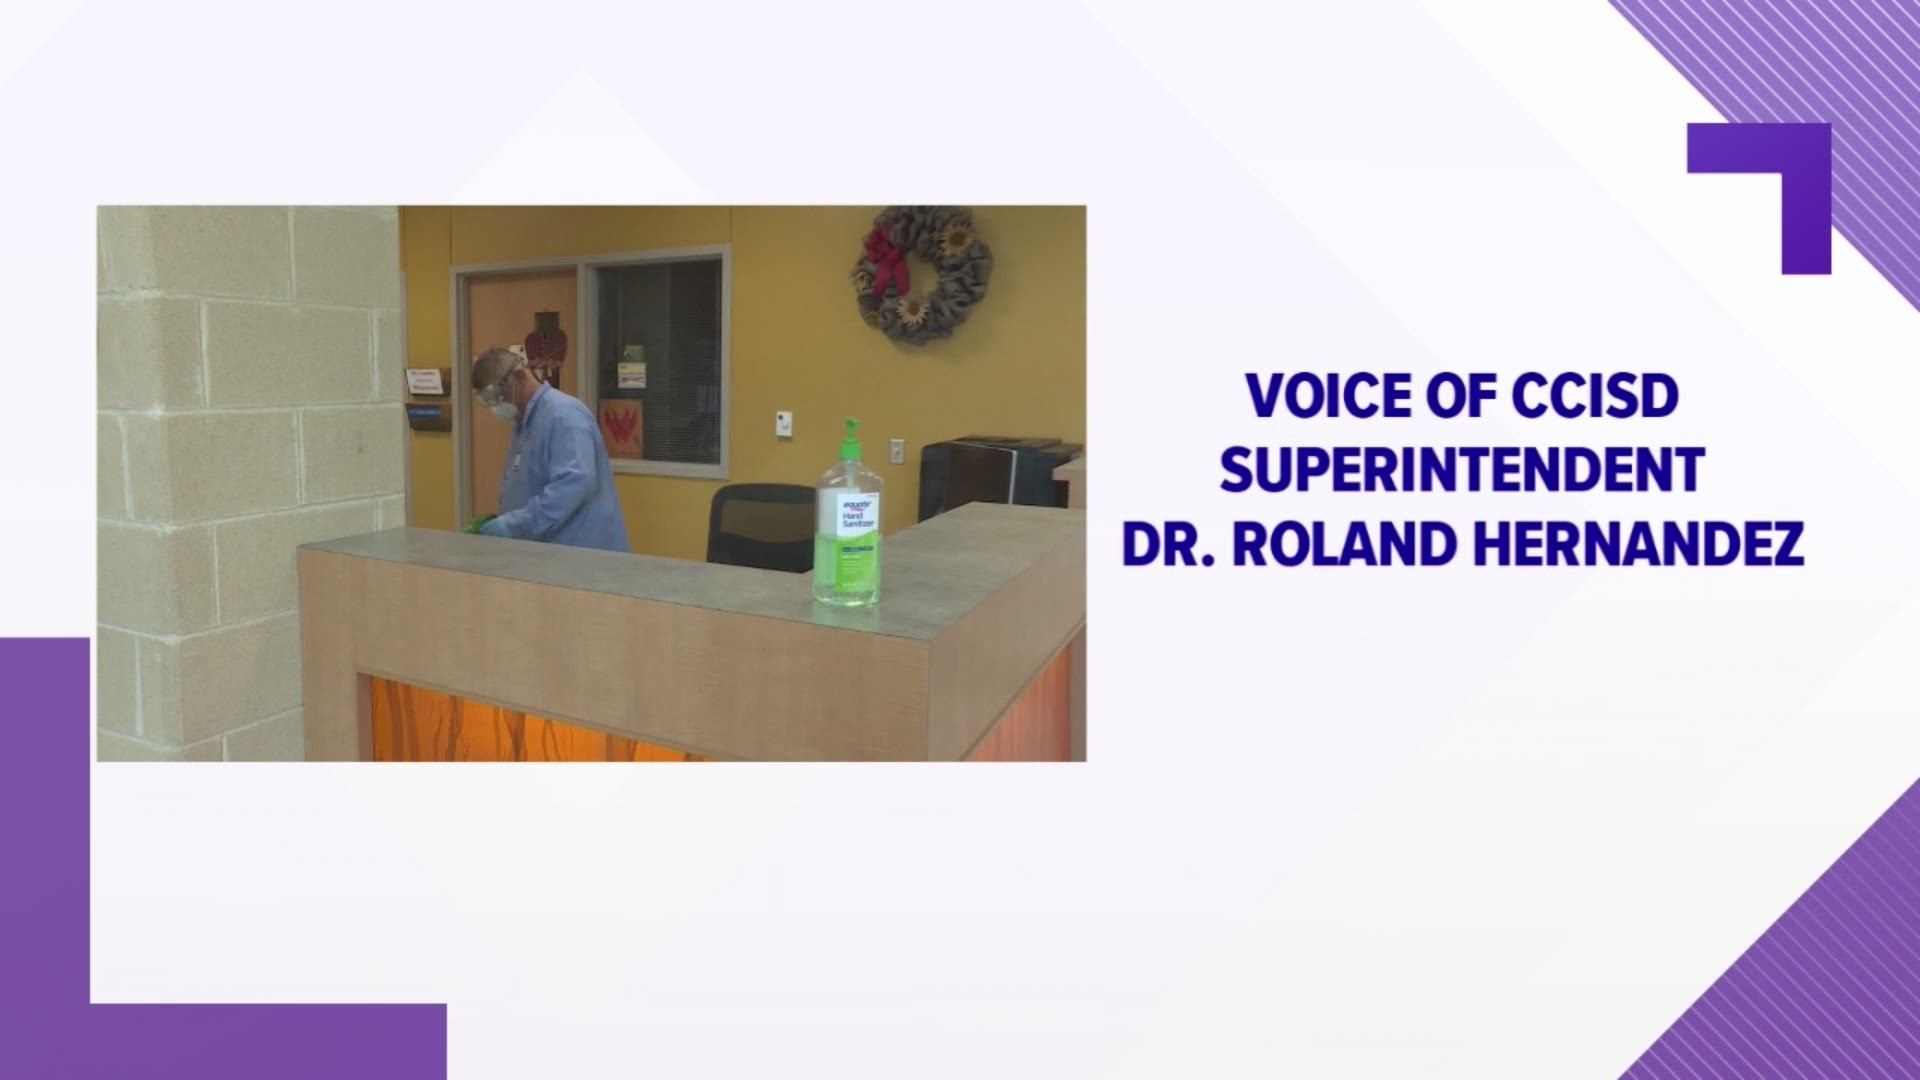 Parents received a voice message Wednesday from CCISD Superintendent Dr. Roland Hernandez.